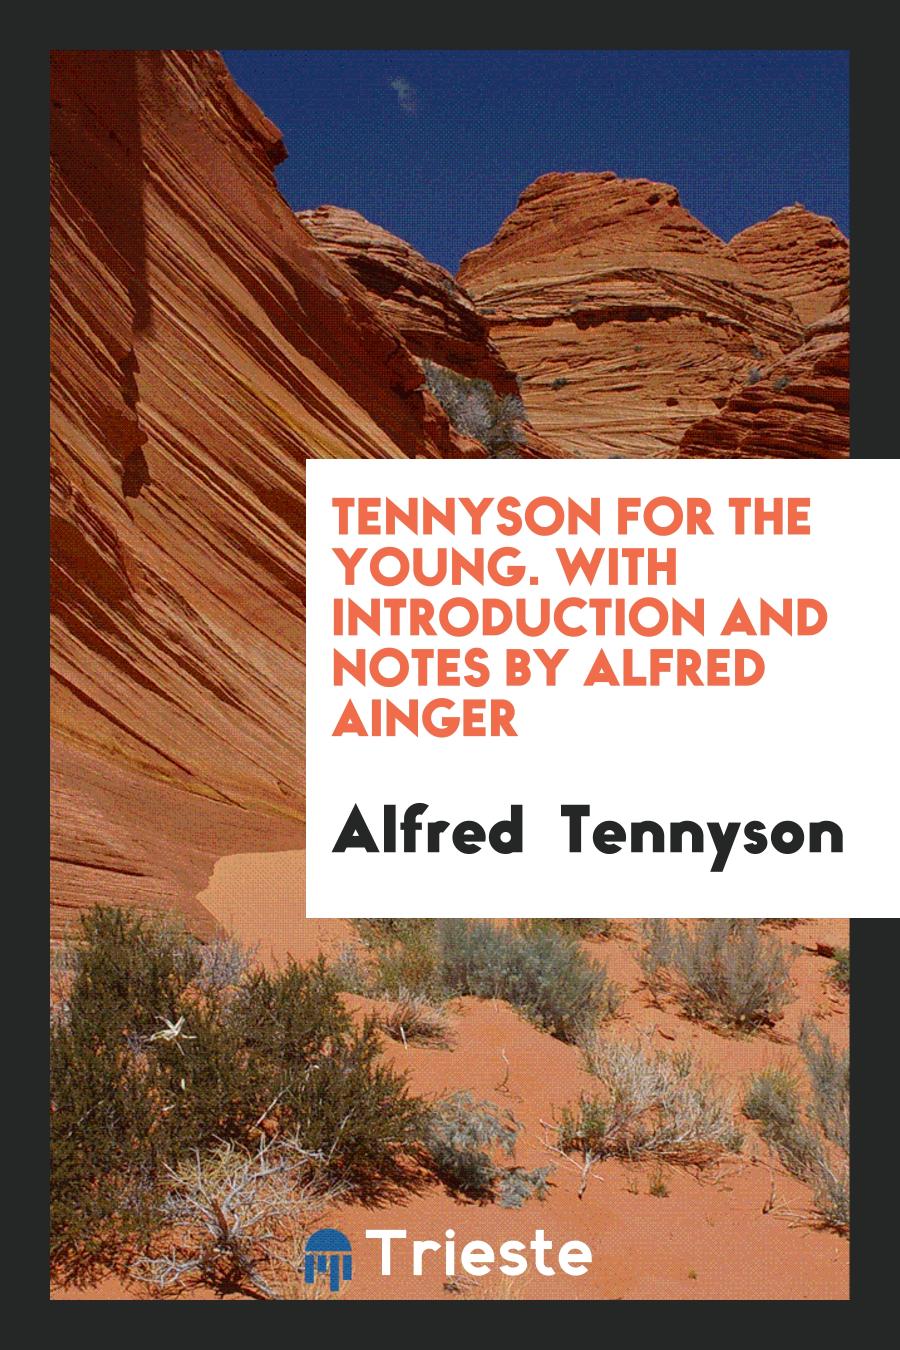 Tennyson for the Young. With Introduction and Notes by Alfred Ainger